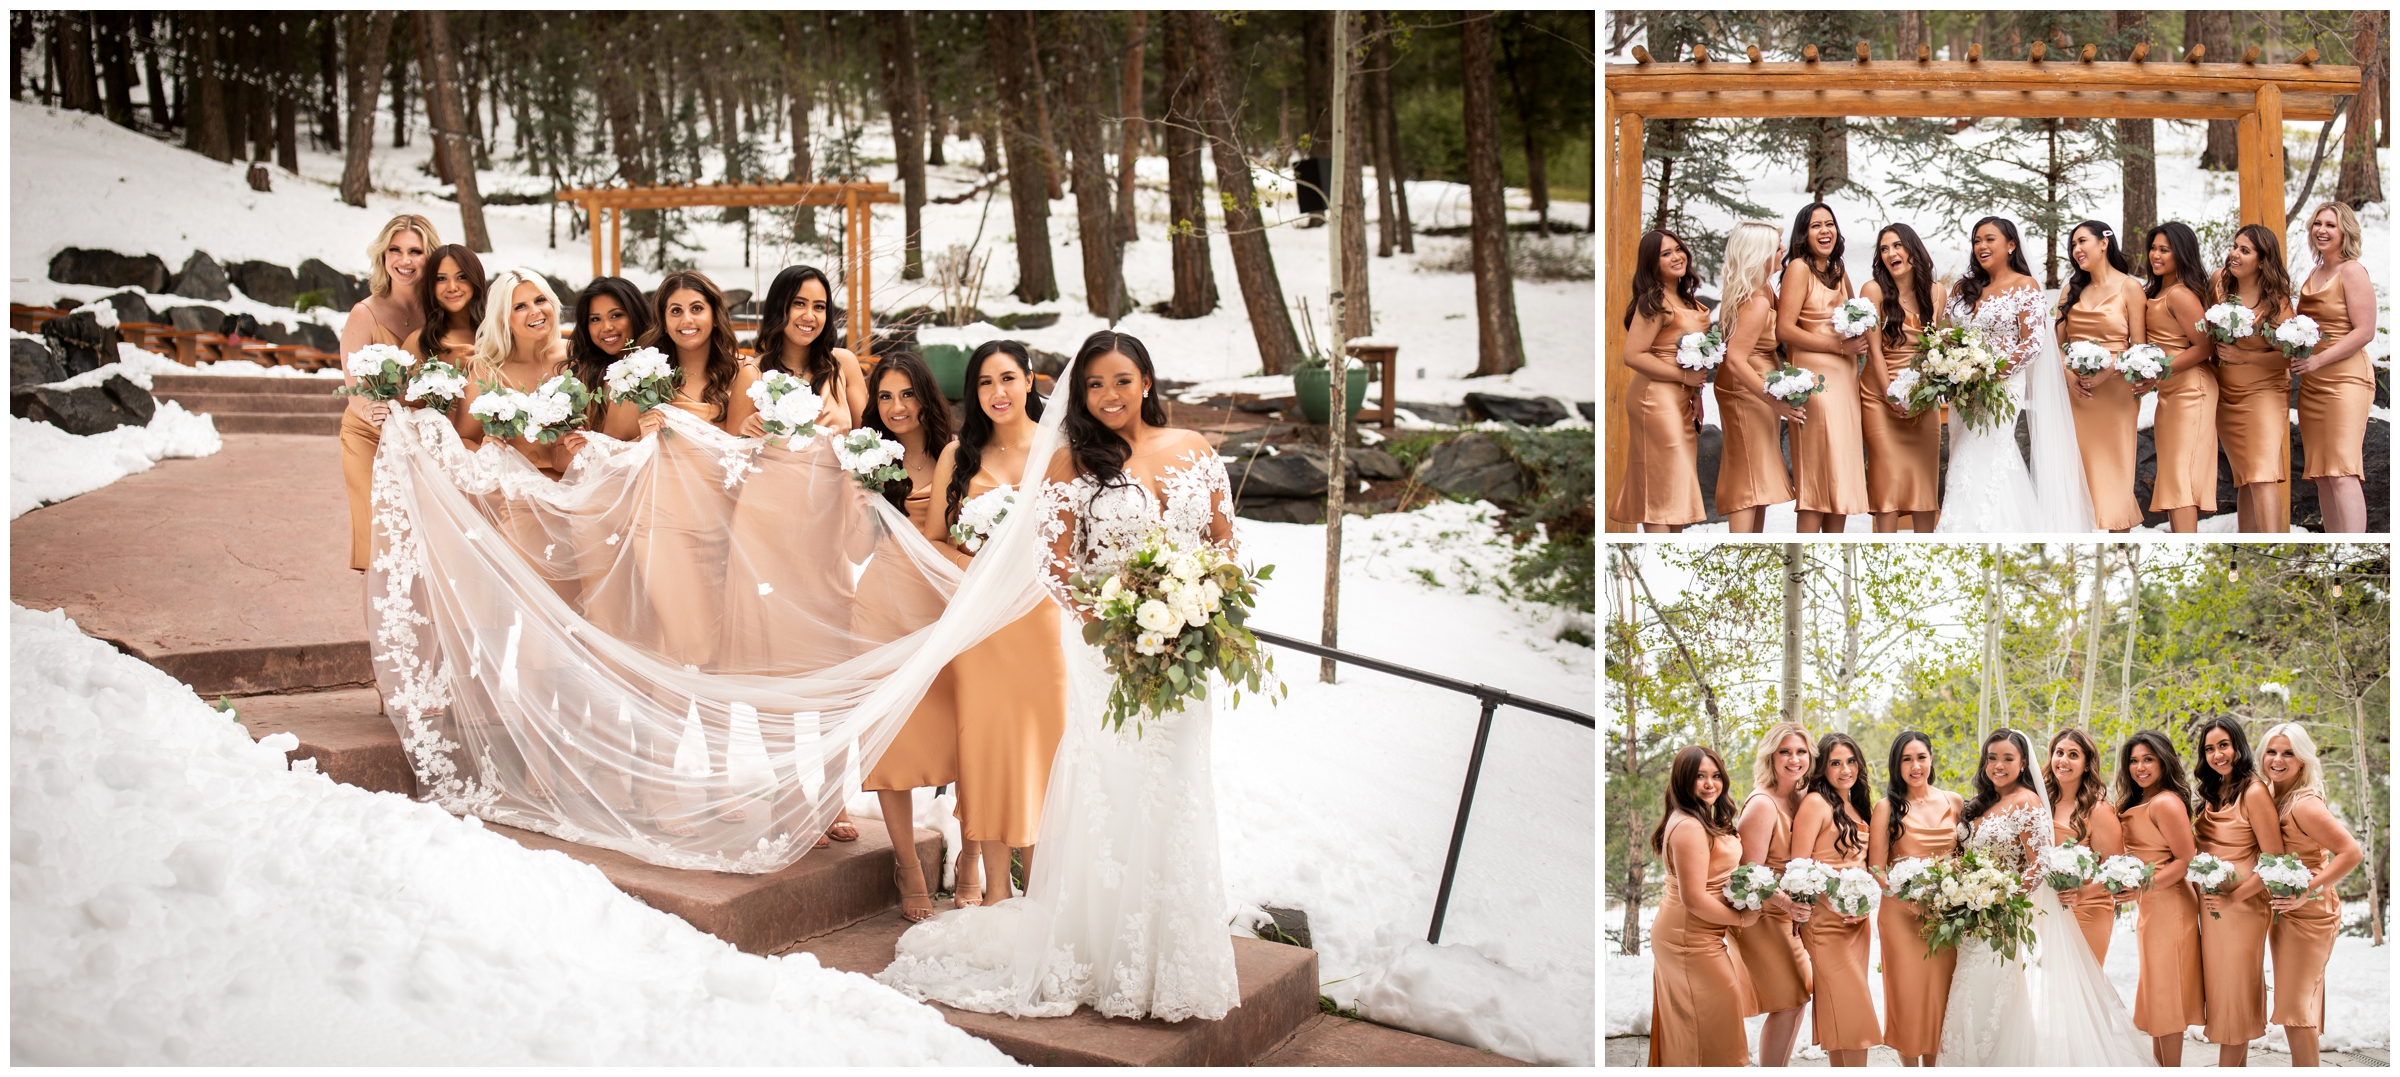 bridesmaids holding bride's veil during bridal party portraits in the snowy Colorado mountains 